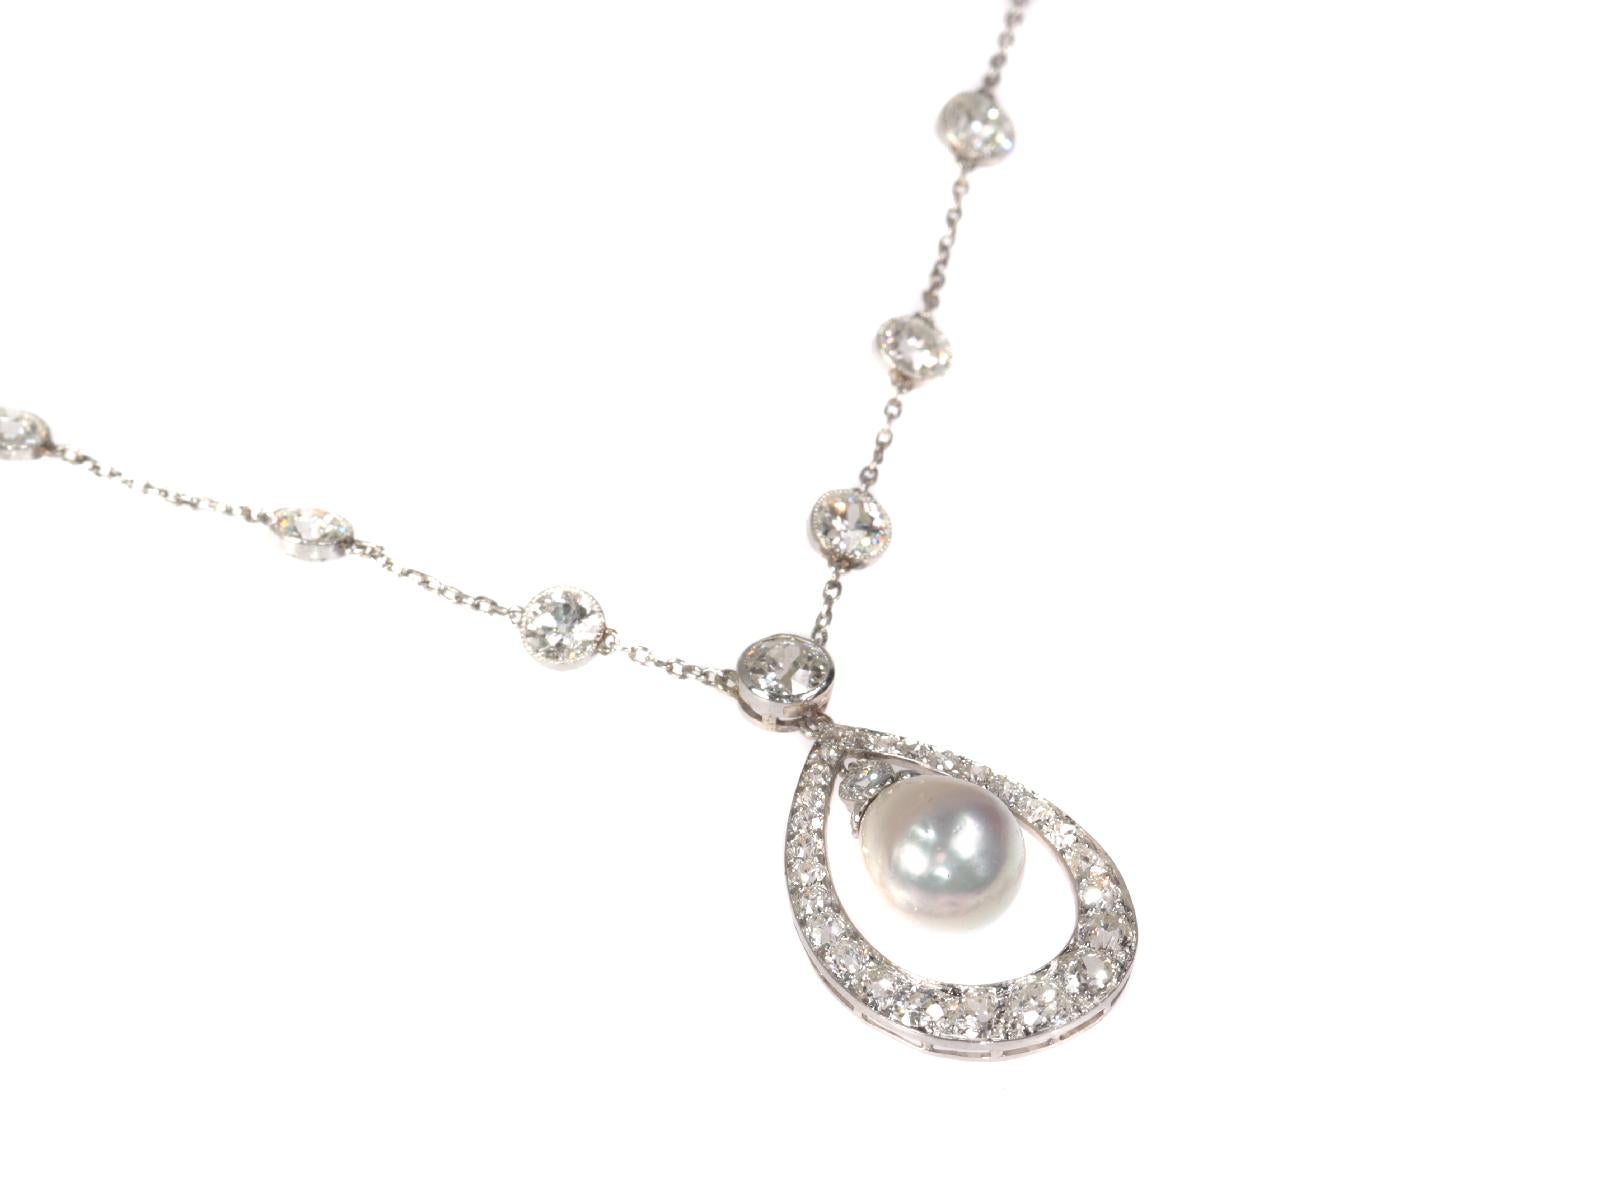 Platinum Art Deco Diamond Necklace with Natural Drop Pearl of 7 Carat, 1930s For Sale 2